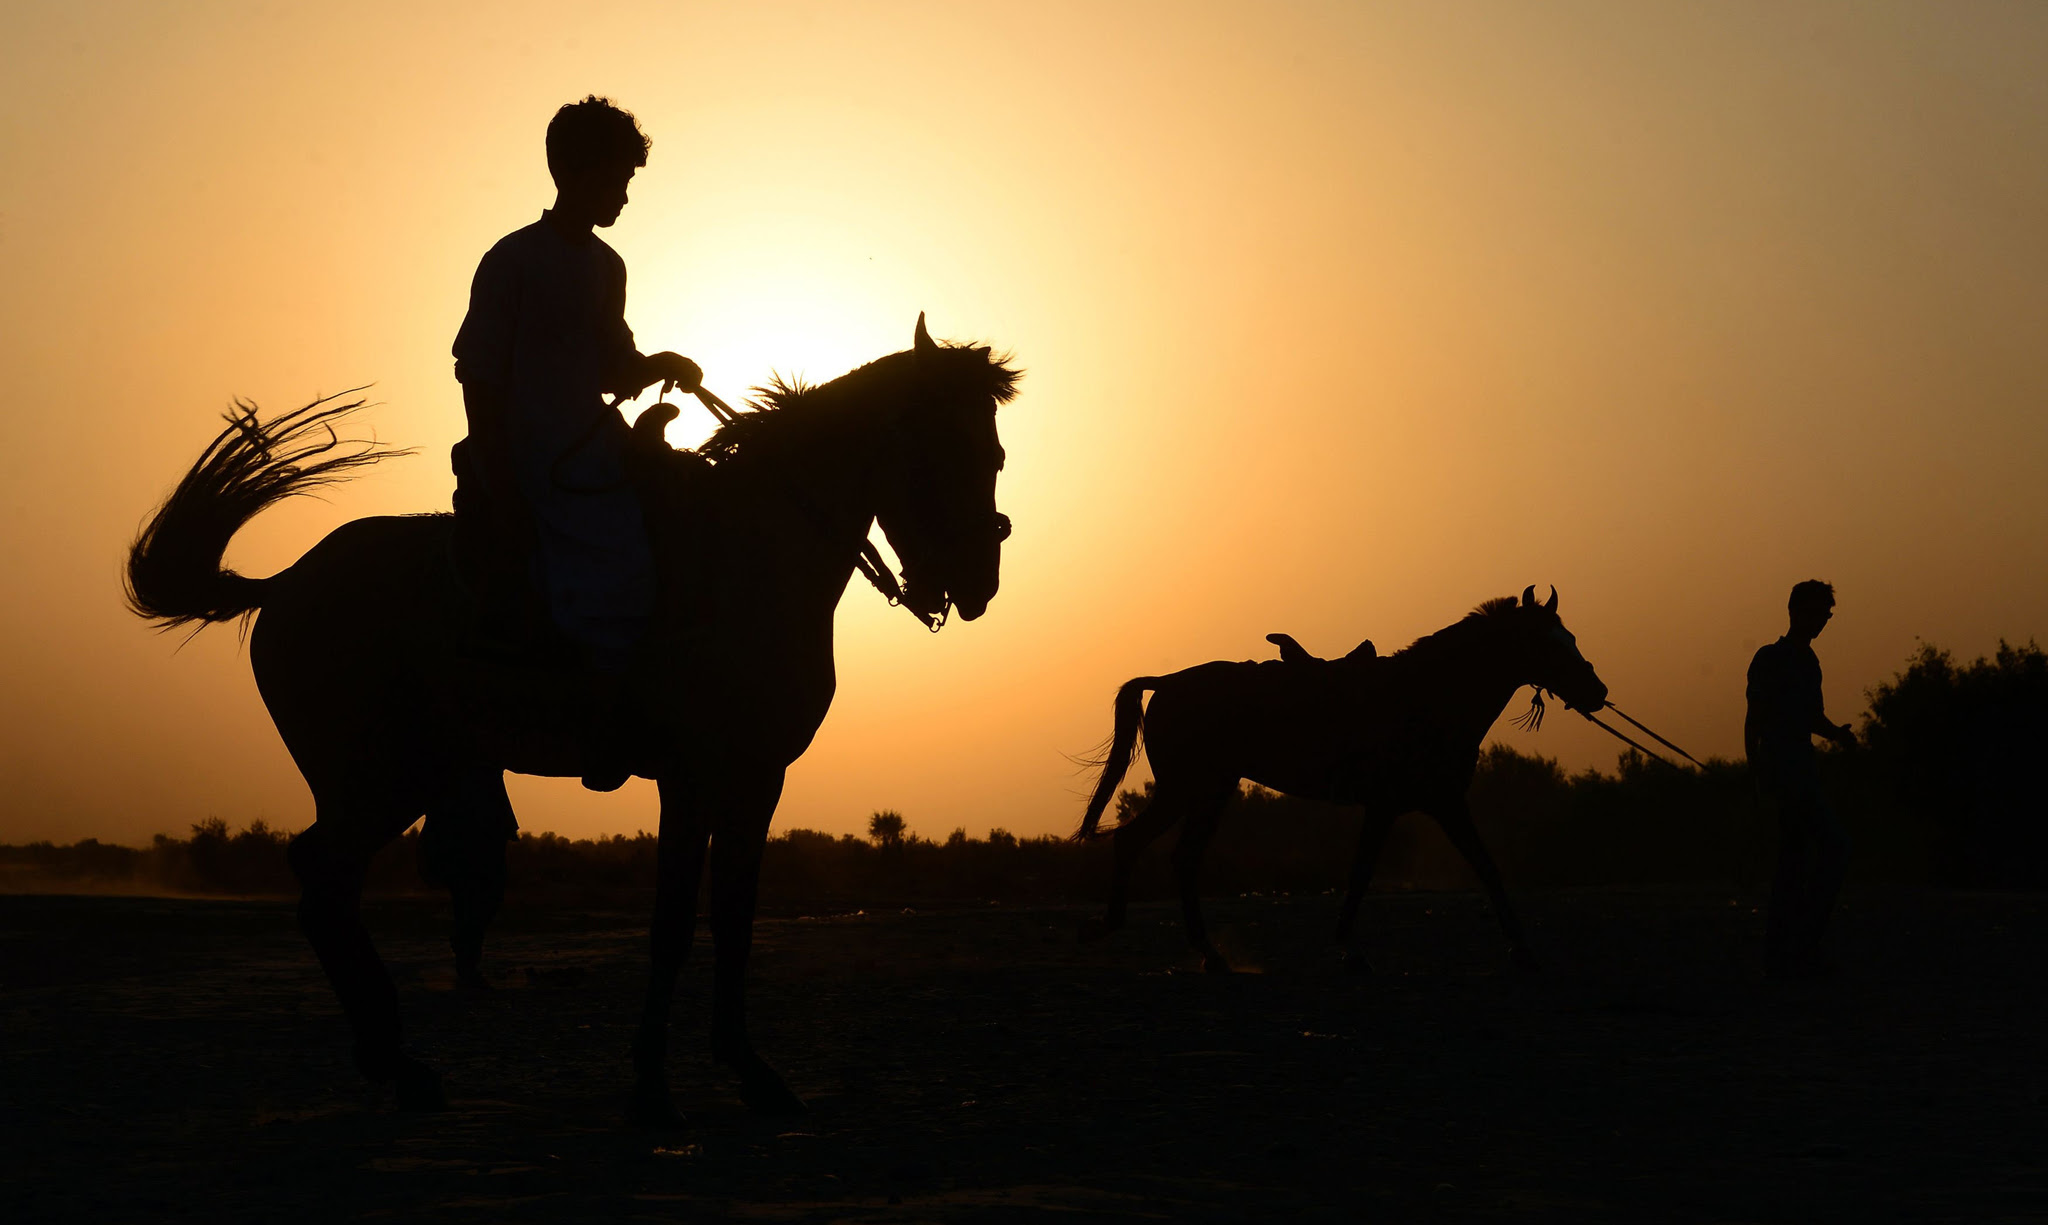 TOPSHOT - In this photograph taken on July 28, 2016, an Afghan man rides a horse as another one leads his horse as the sun sets in Injil district of Herat province. / AFP PHOTO / AREF KARIMIAREF KARIMI/AFP/Getty Images